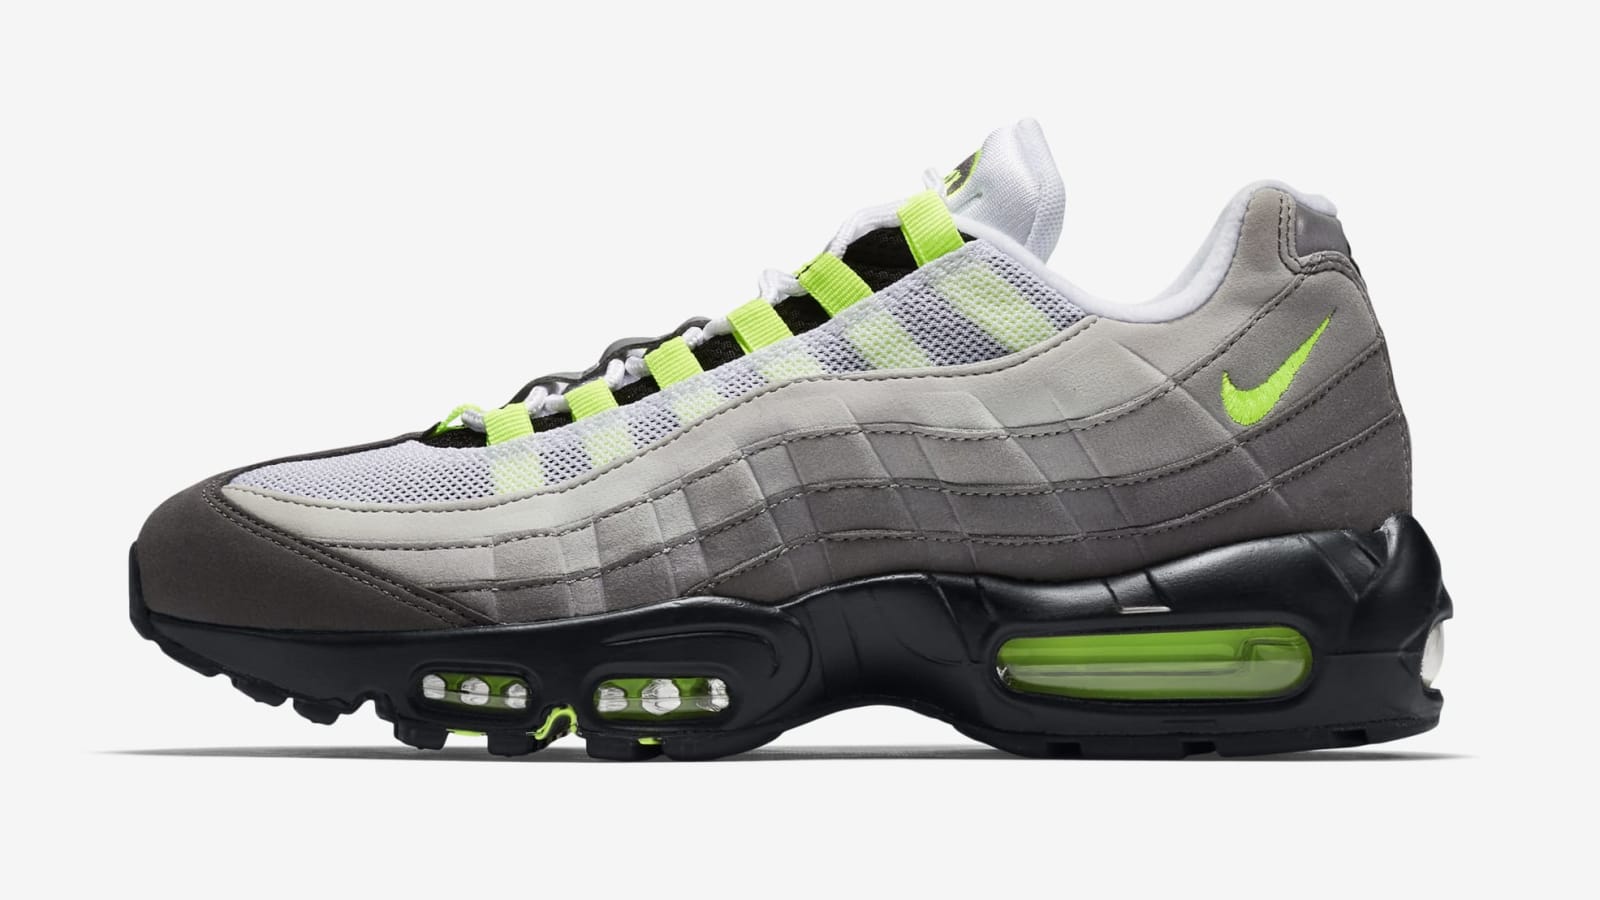 Nike Air Max 95 &quot;Neon&quot; To Make A Comeback This Year: Details